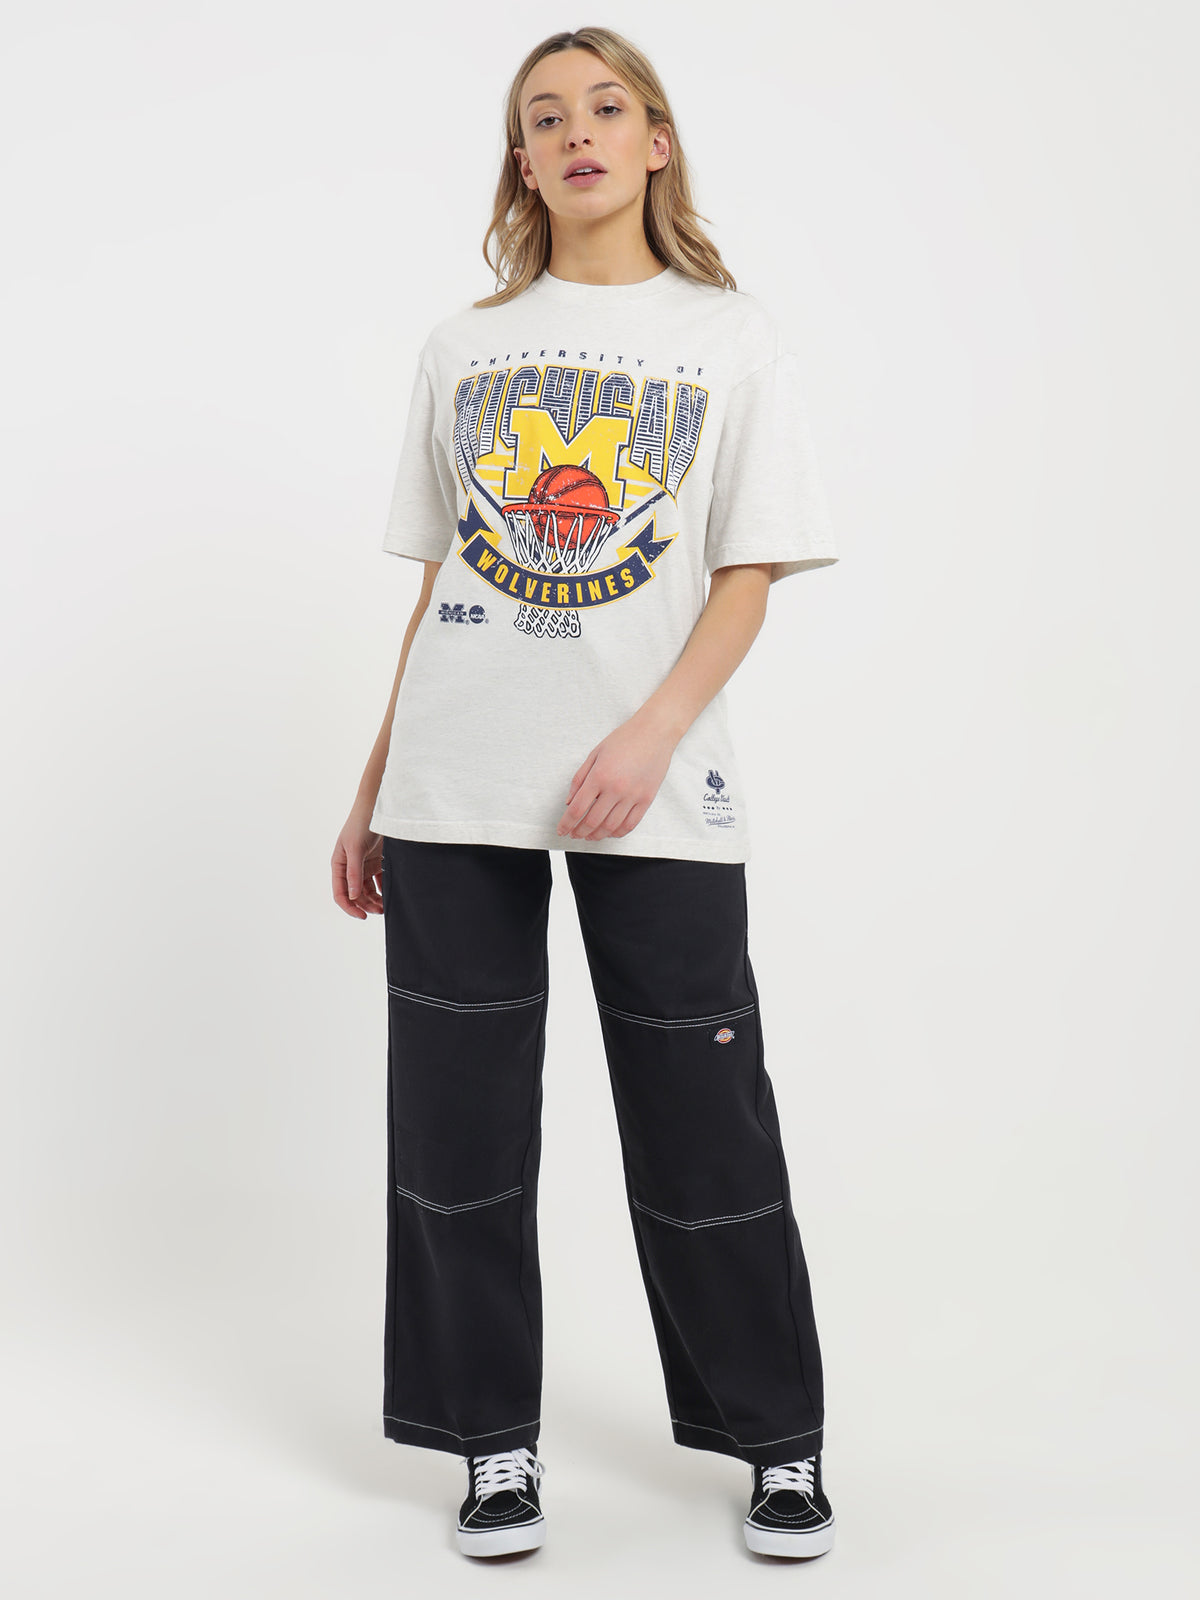 Off The Rim Michigan T-Shirt in White Marle